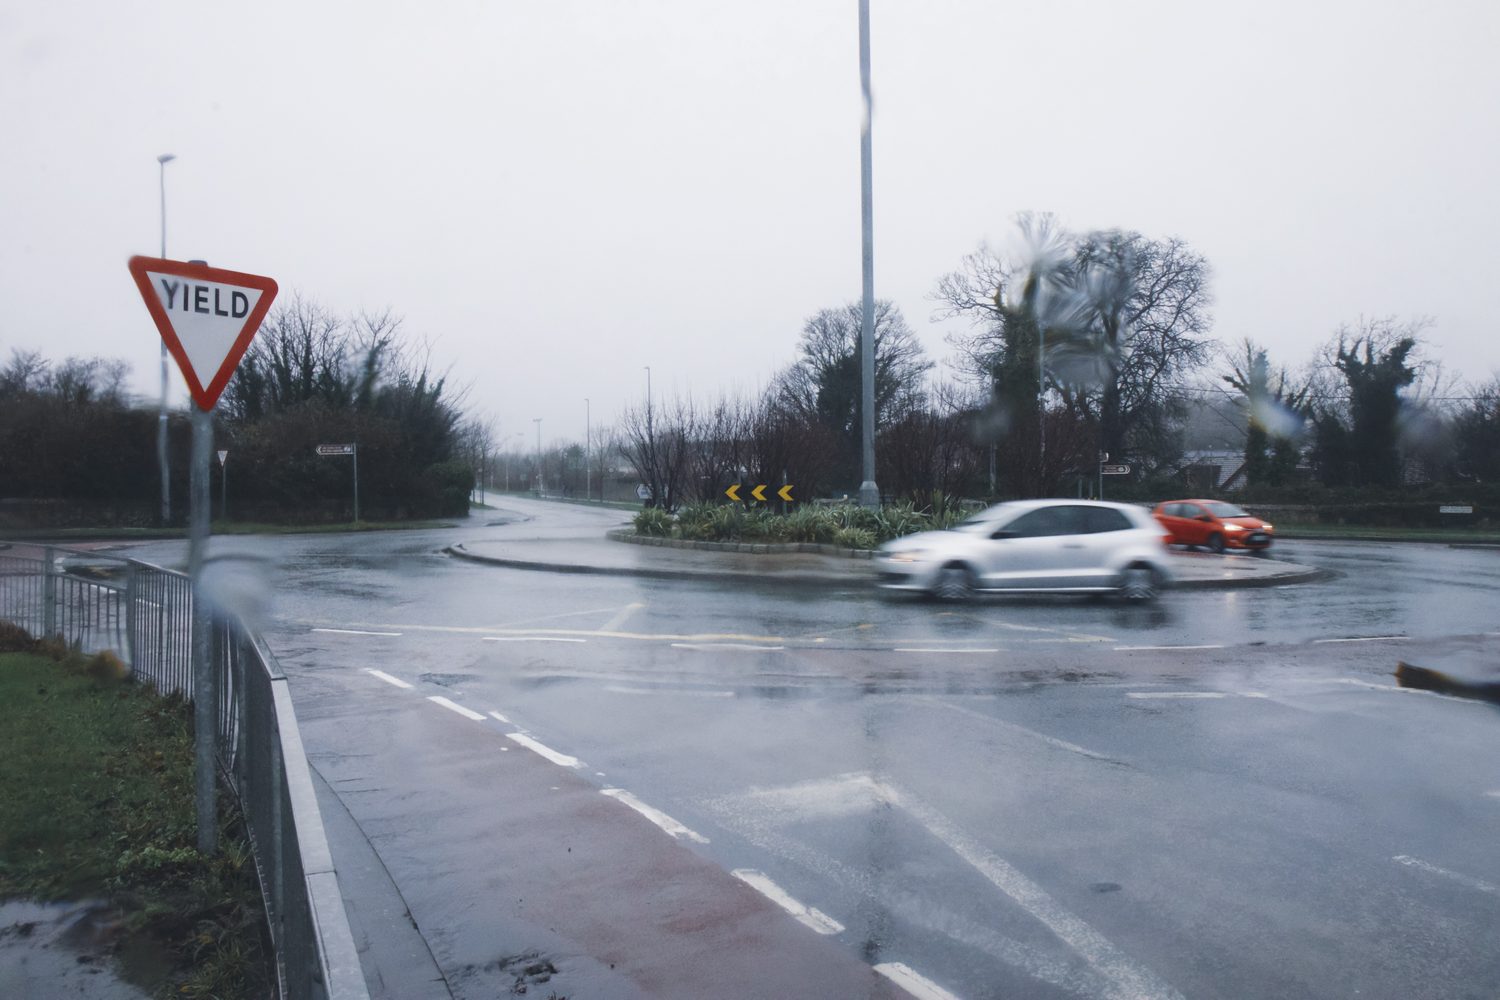 Roundabouts in Ireland: a driver